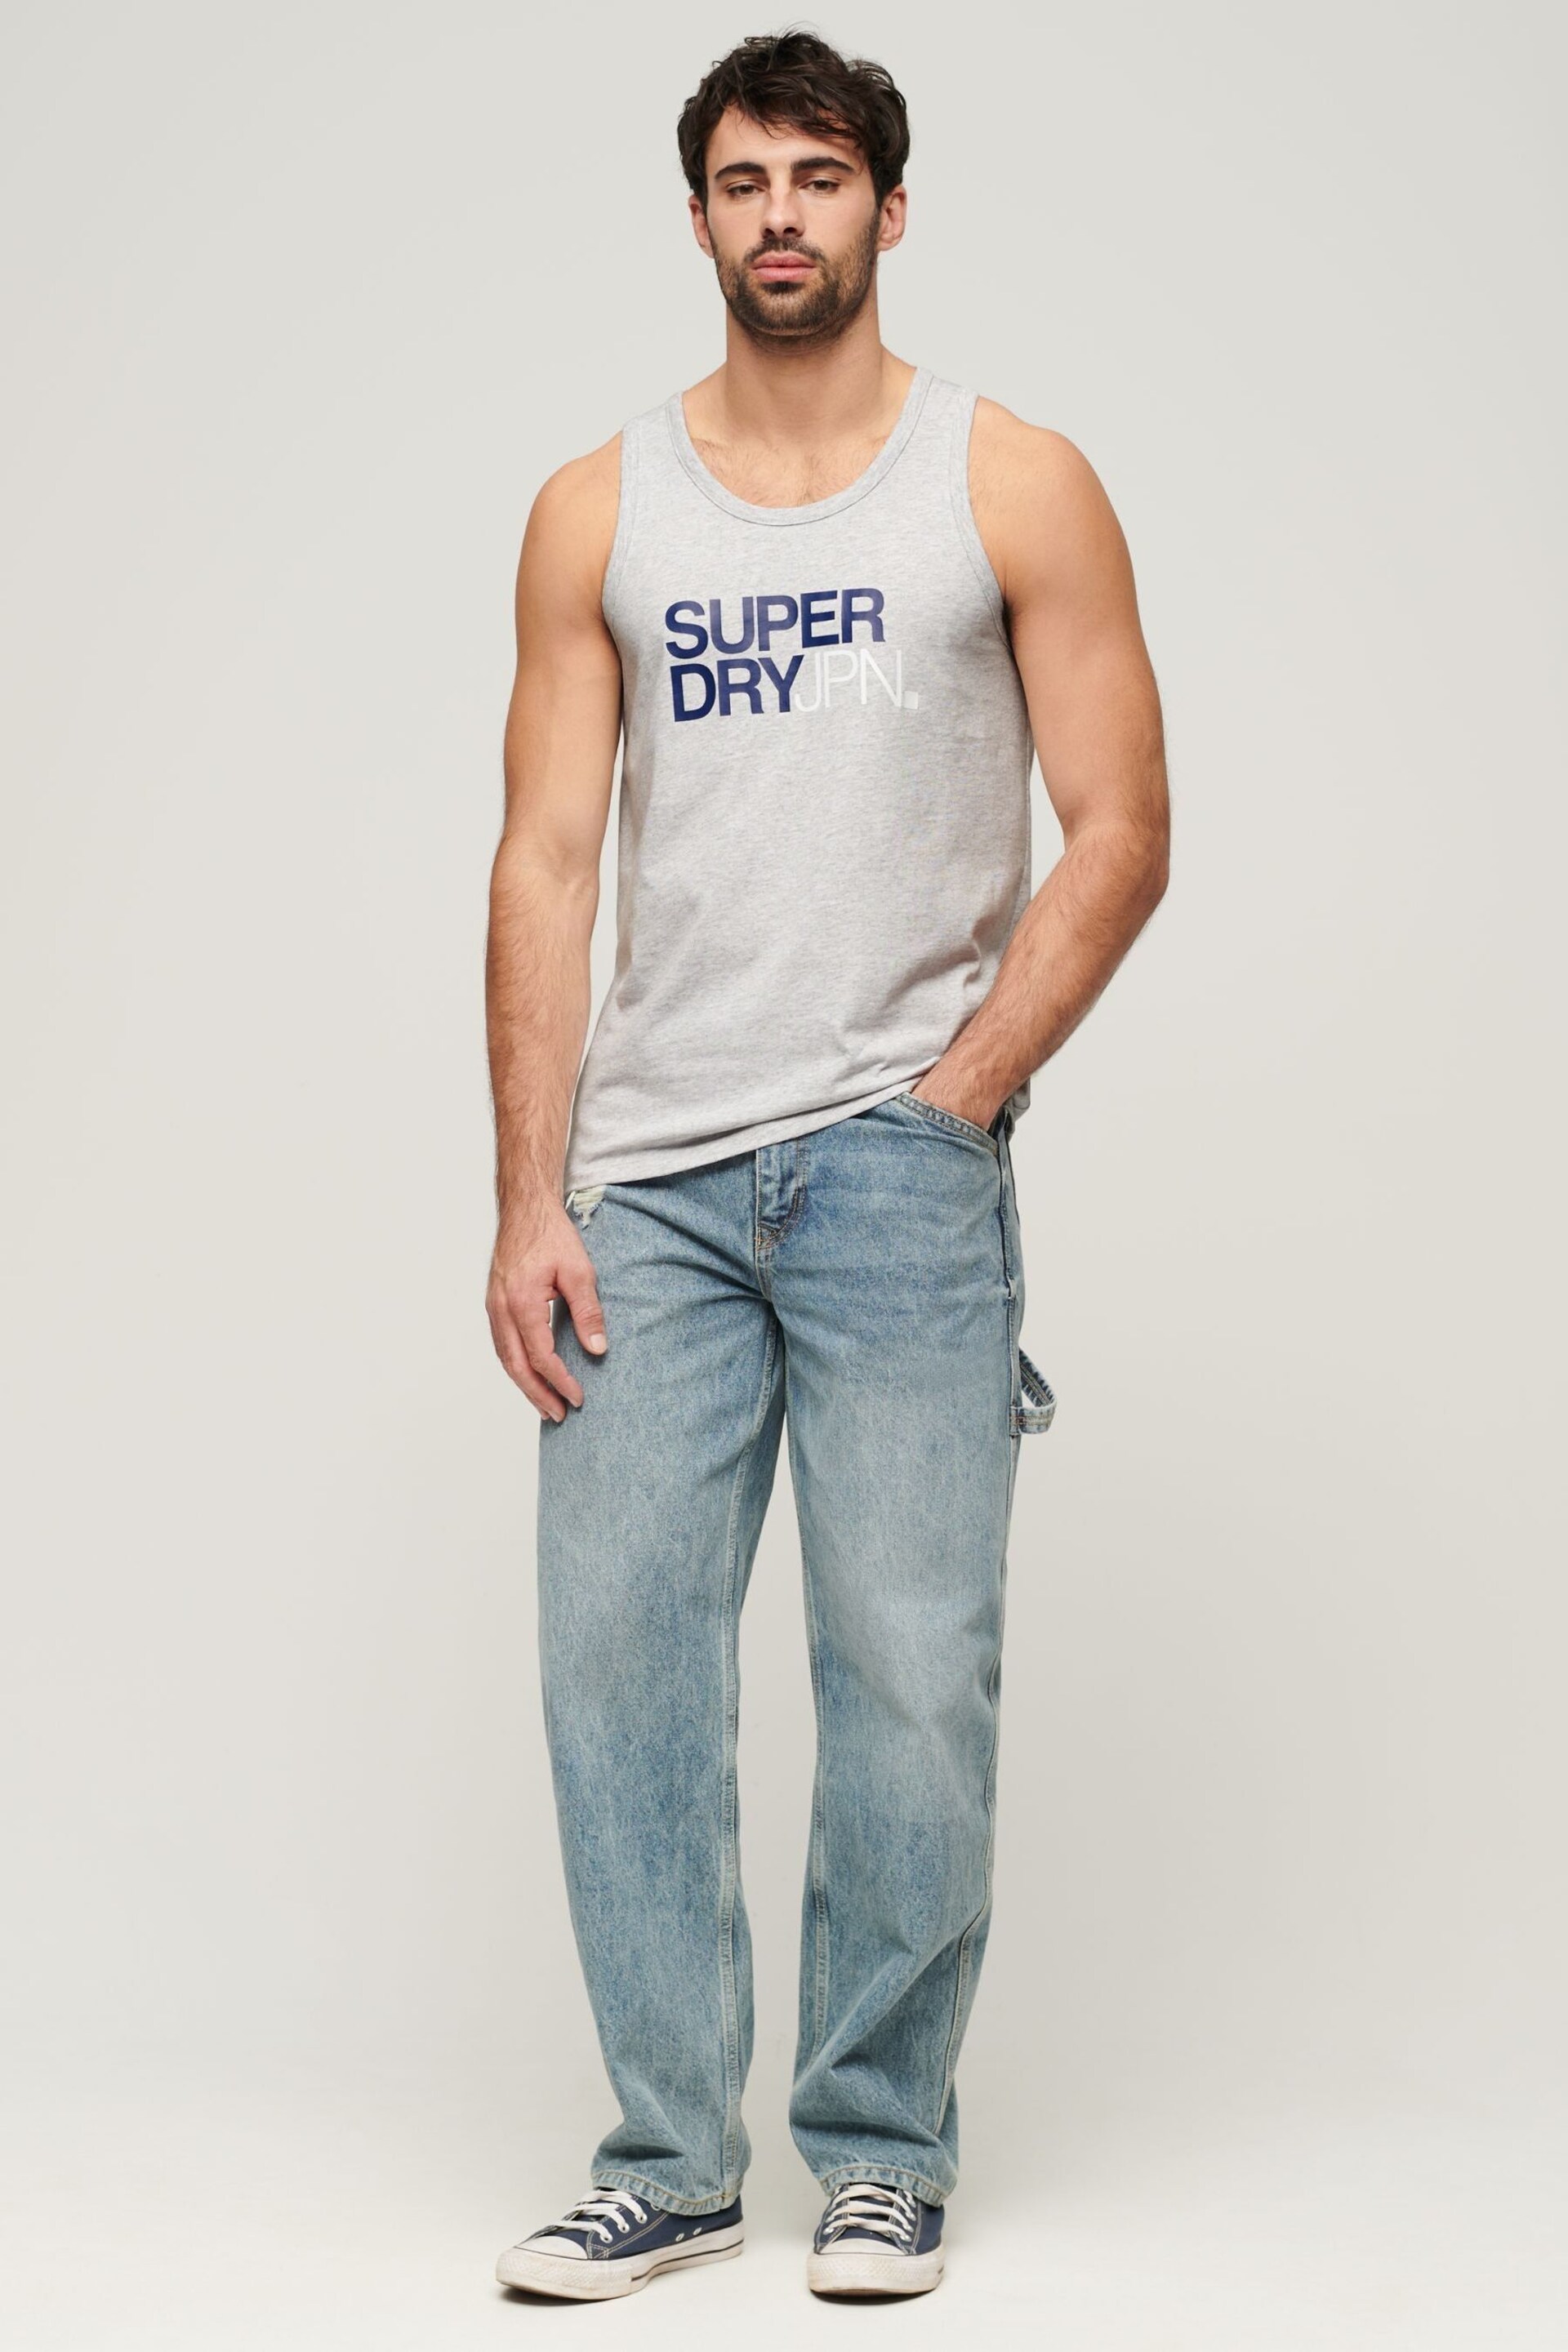 Superdry Grey Sportswear Logo Relaxed Vest - Image 3 of 4